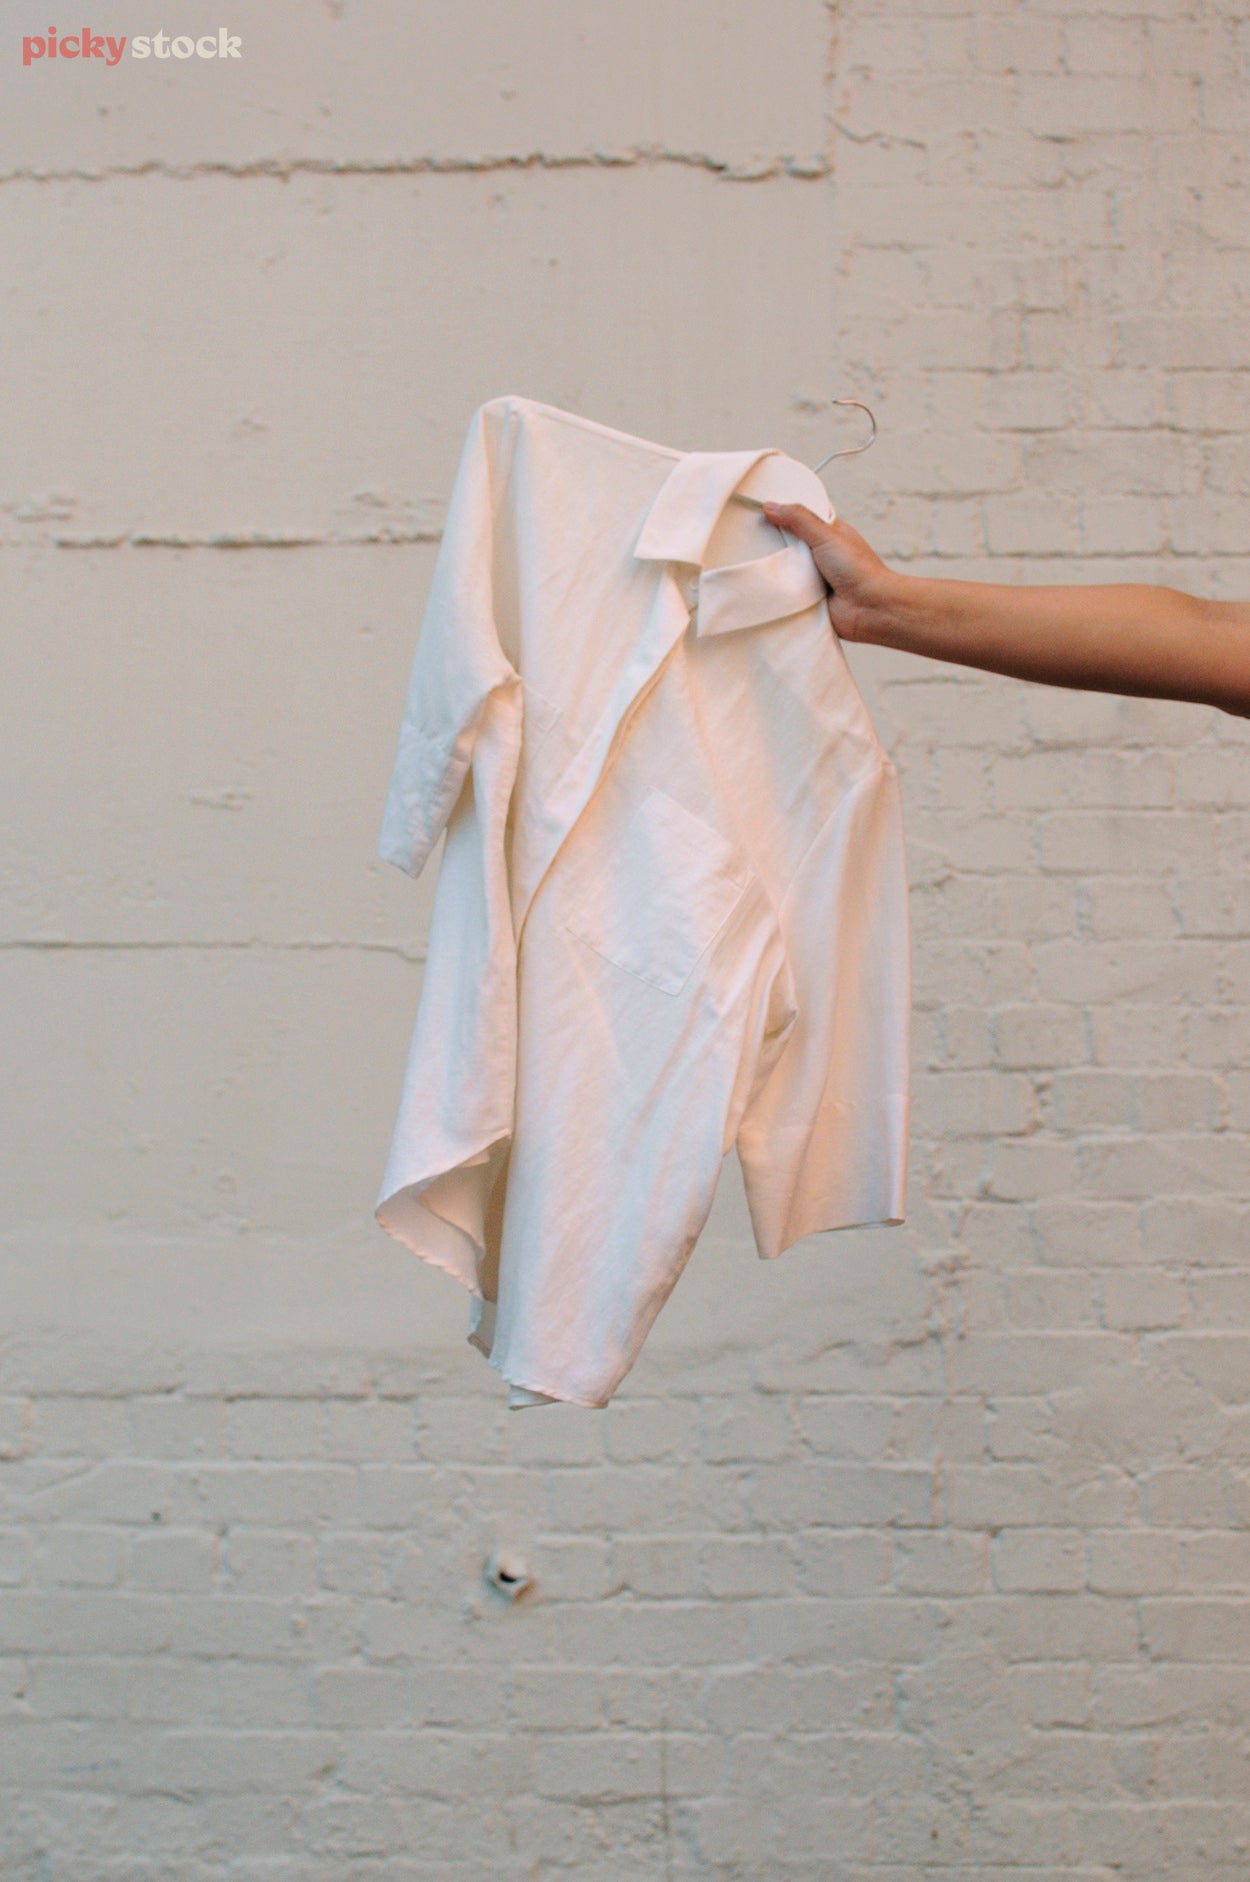 Portrait close-up of a tanned hand holding a small white shirt and clothes hanger at an angle against a whitewashed brick wall.